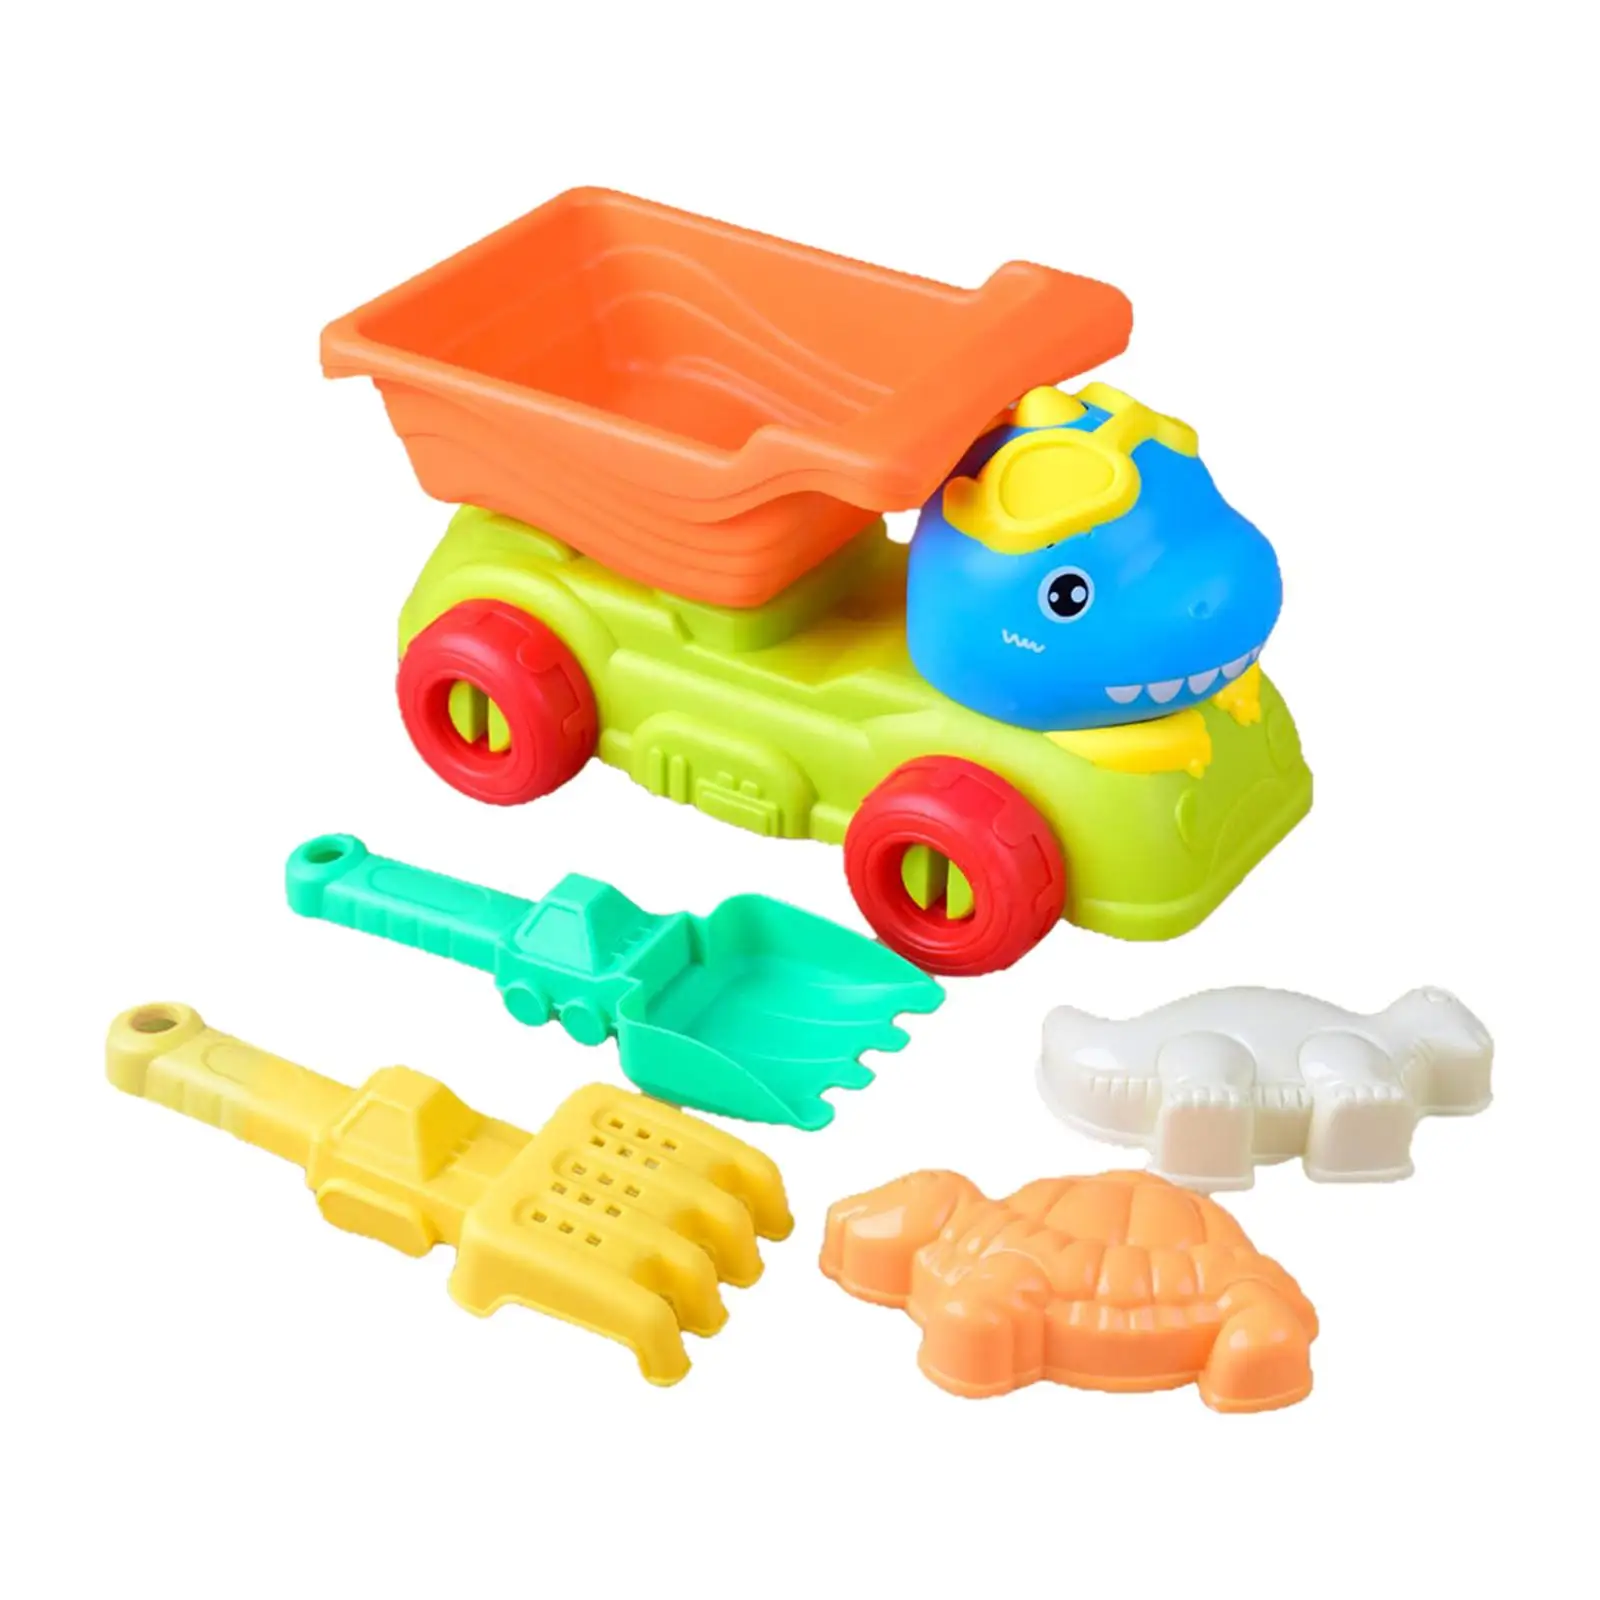 Beach Toy Reusable water playing Tools Interactive Multifunctional kids Beach Sand Toys Set for Summer Beach Seaside Travel